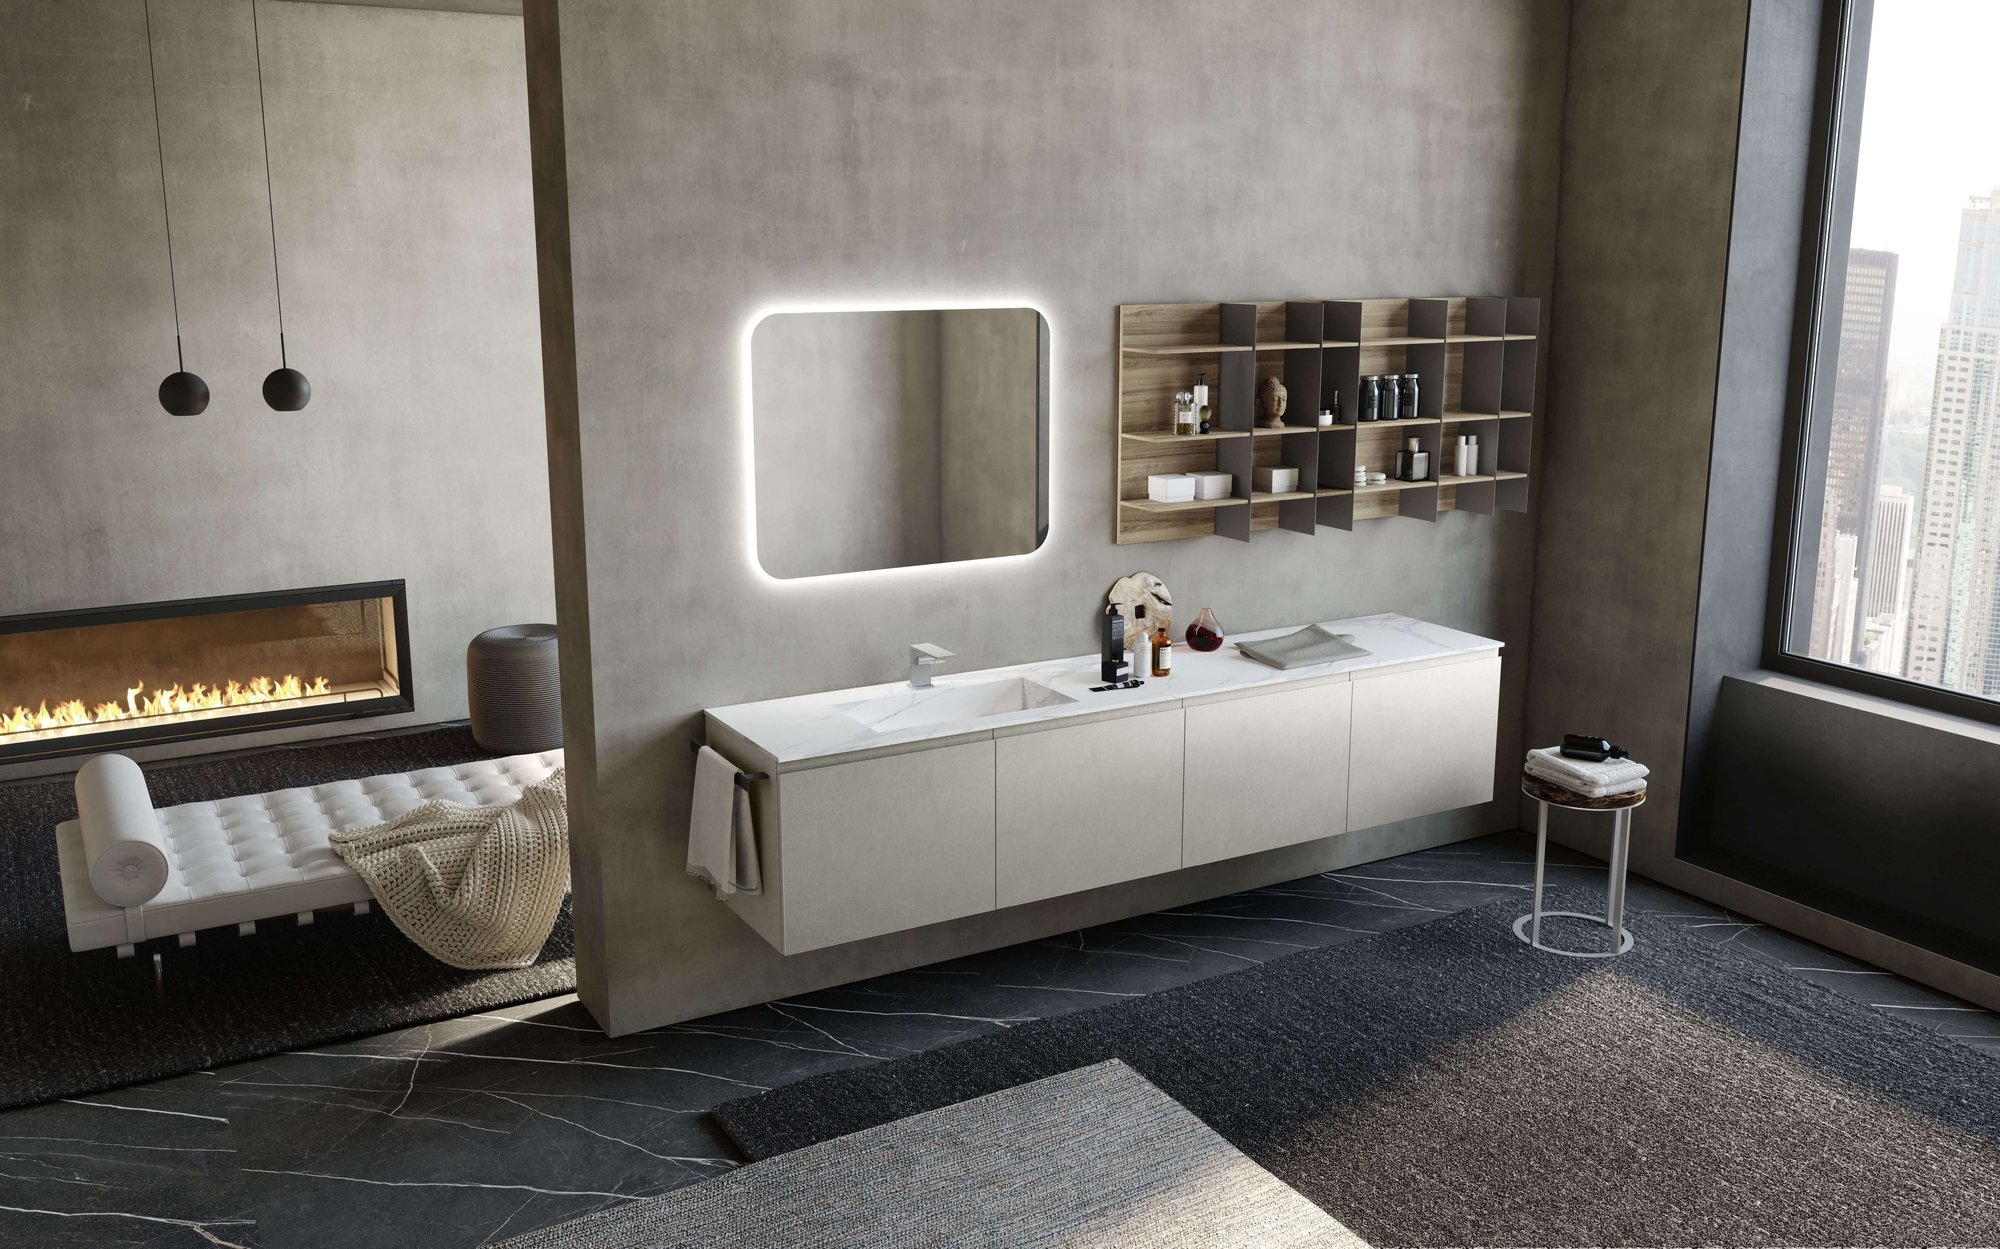 A look into a timeless luxury bathroom layout that includes floating vanity, backlit mirror and open-shelf storage.